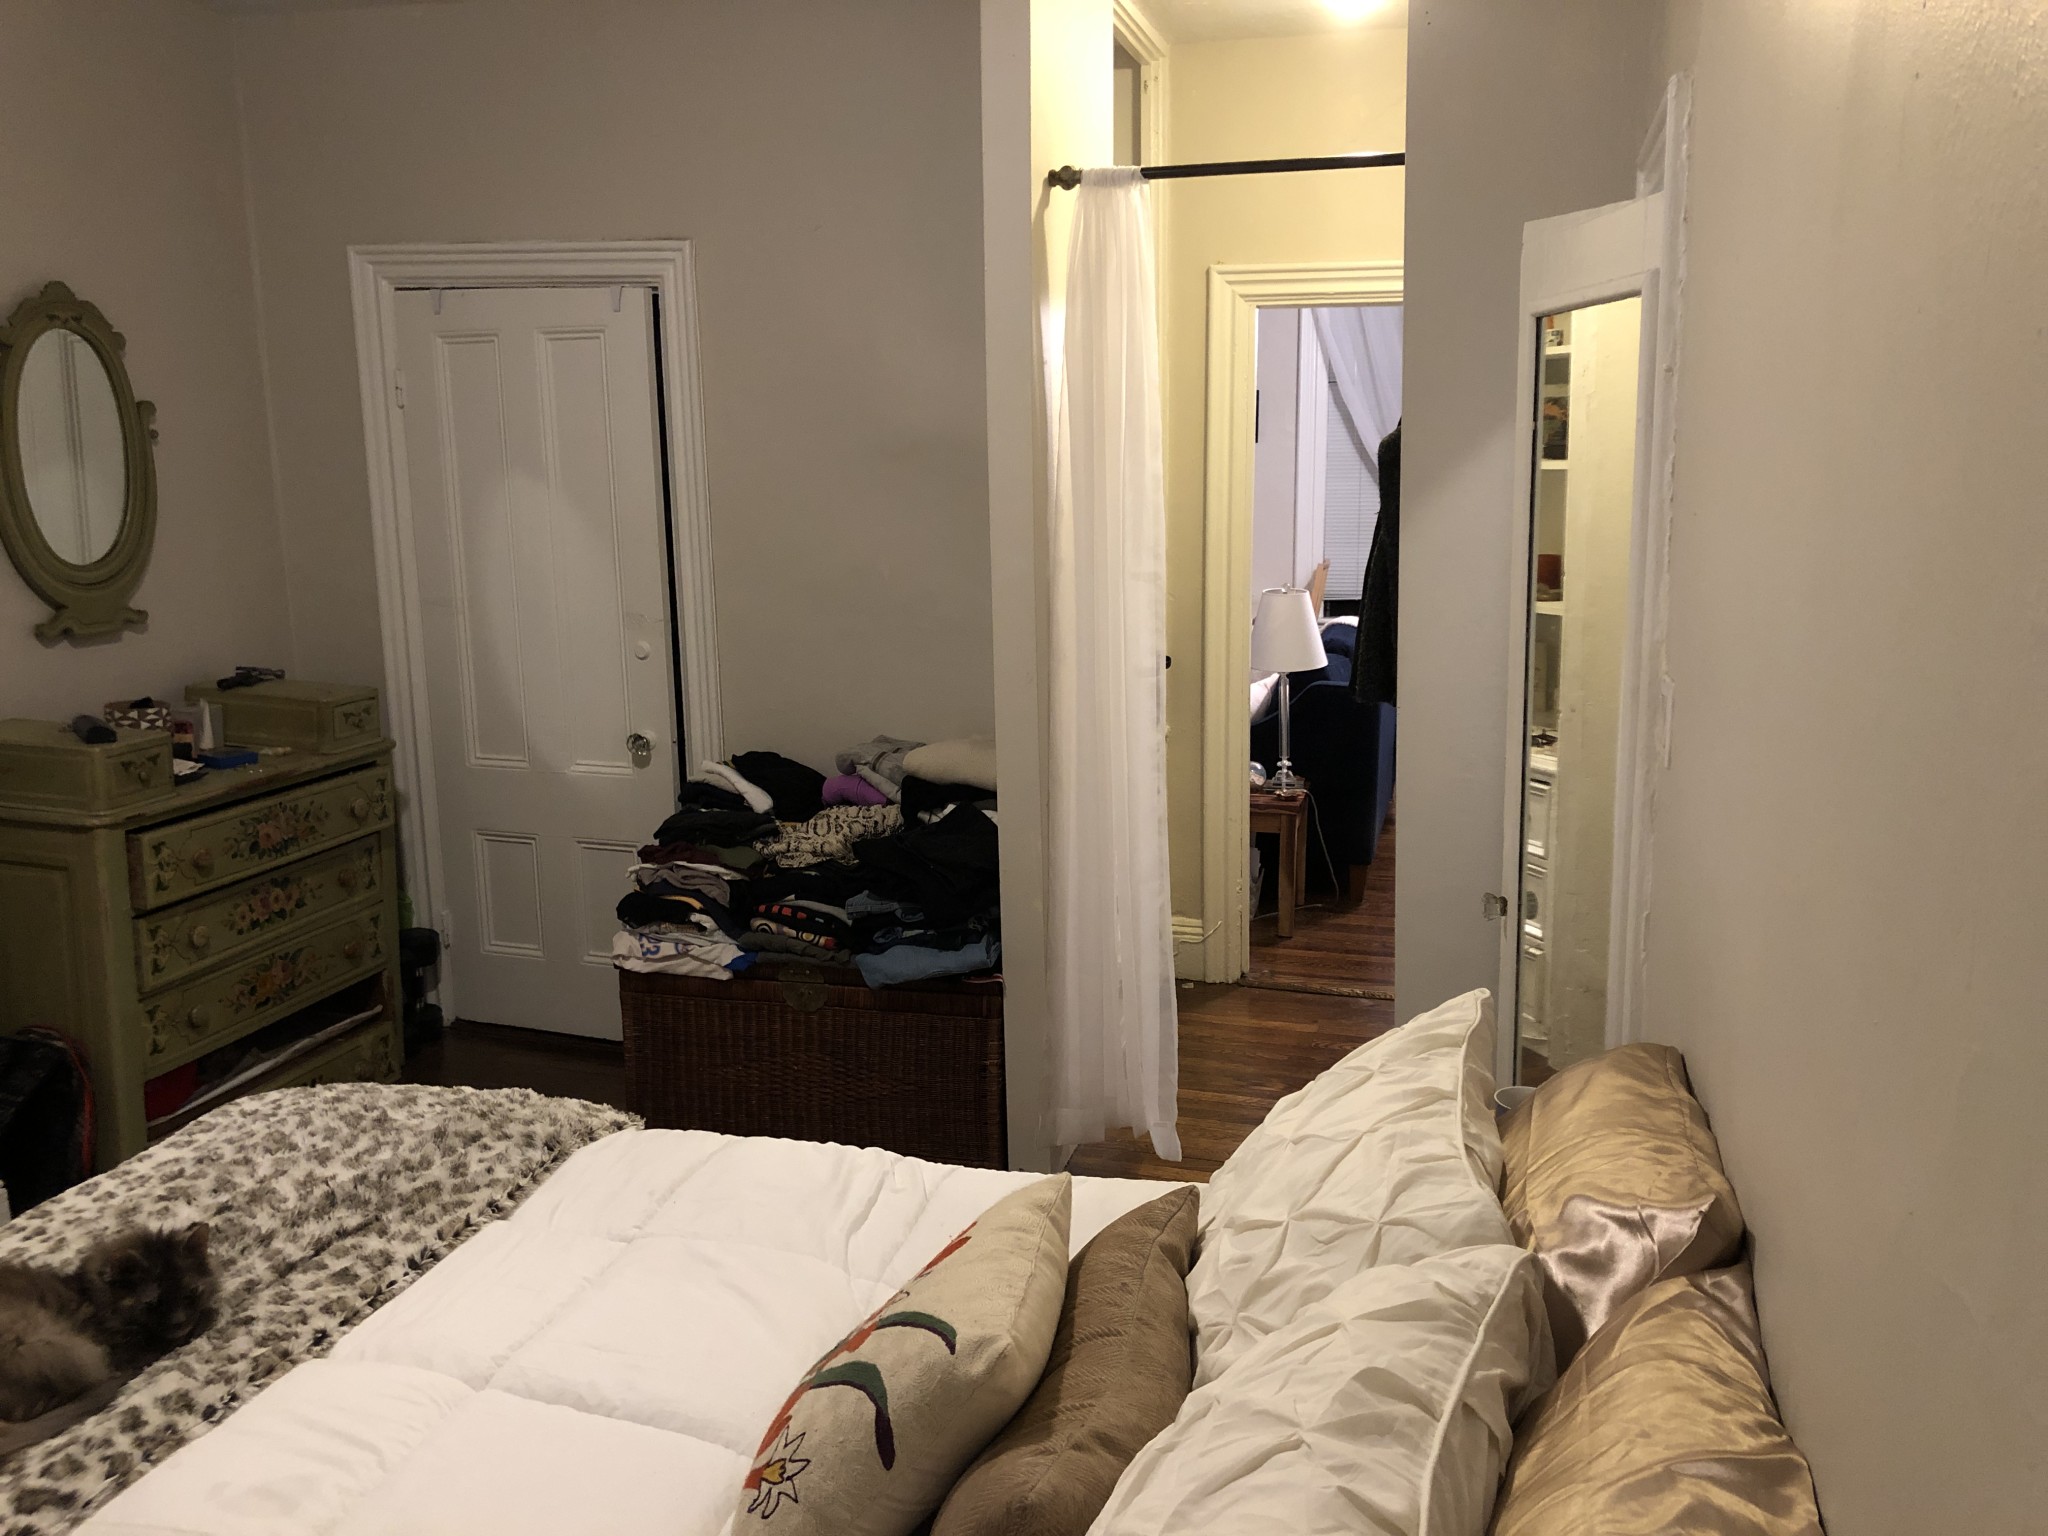 Photos of apartment on South Russell St.,Boston MA 02114